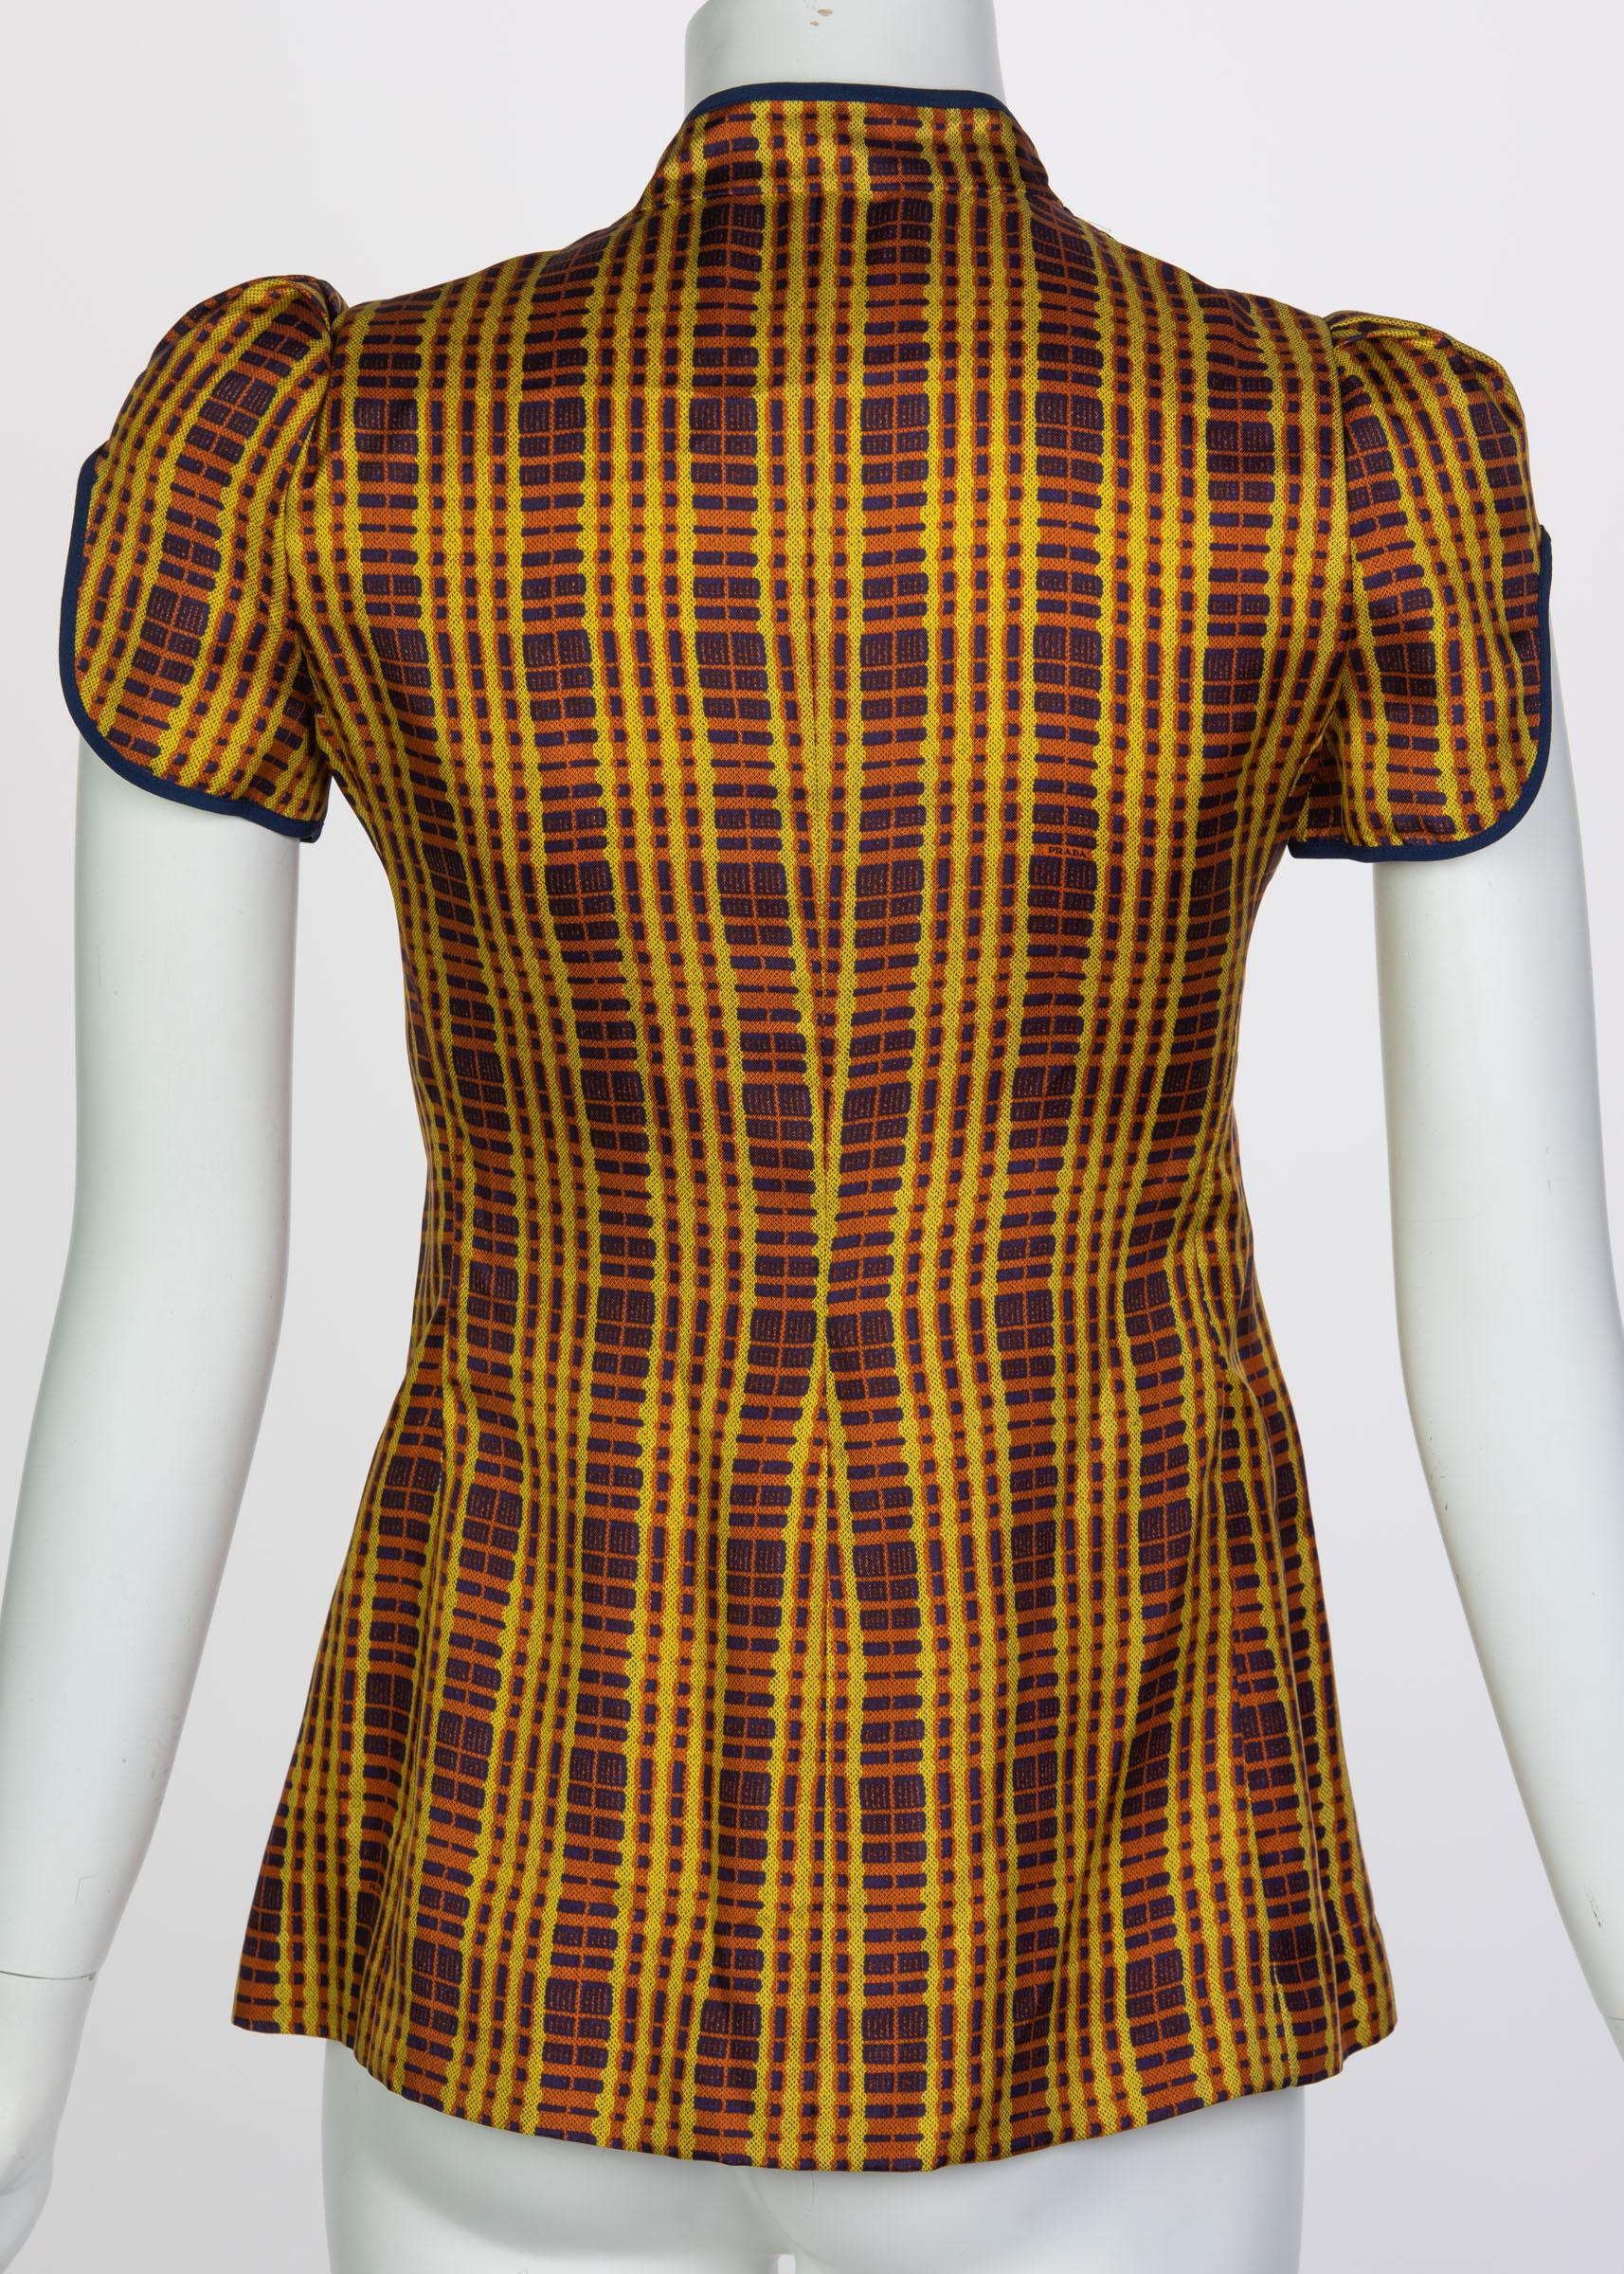 Prada Fairy Collection Silk Cut Out Yellow Plaid Blouse Spring 2008 In Excellent Condition In Boca Raton, FL